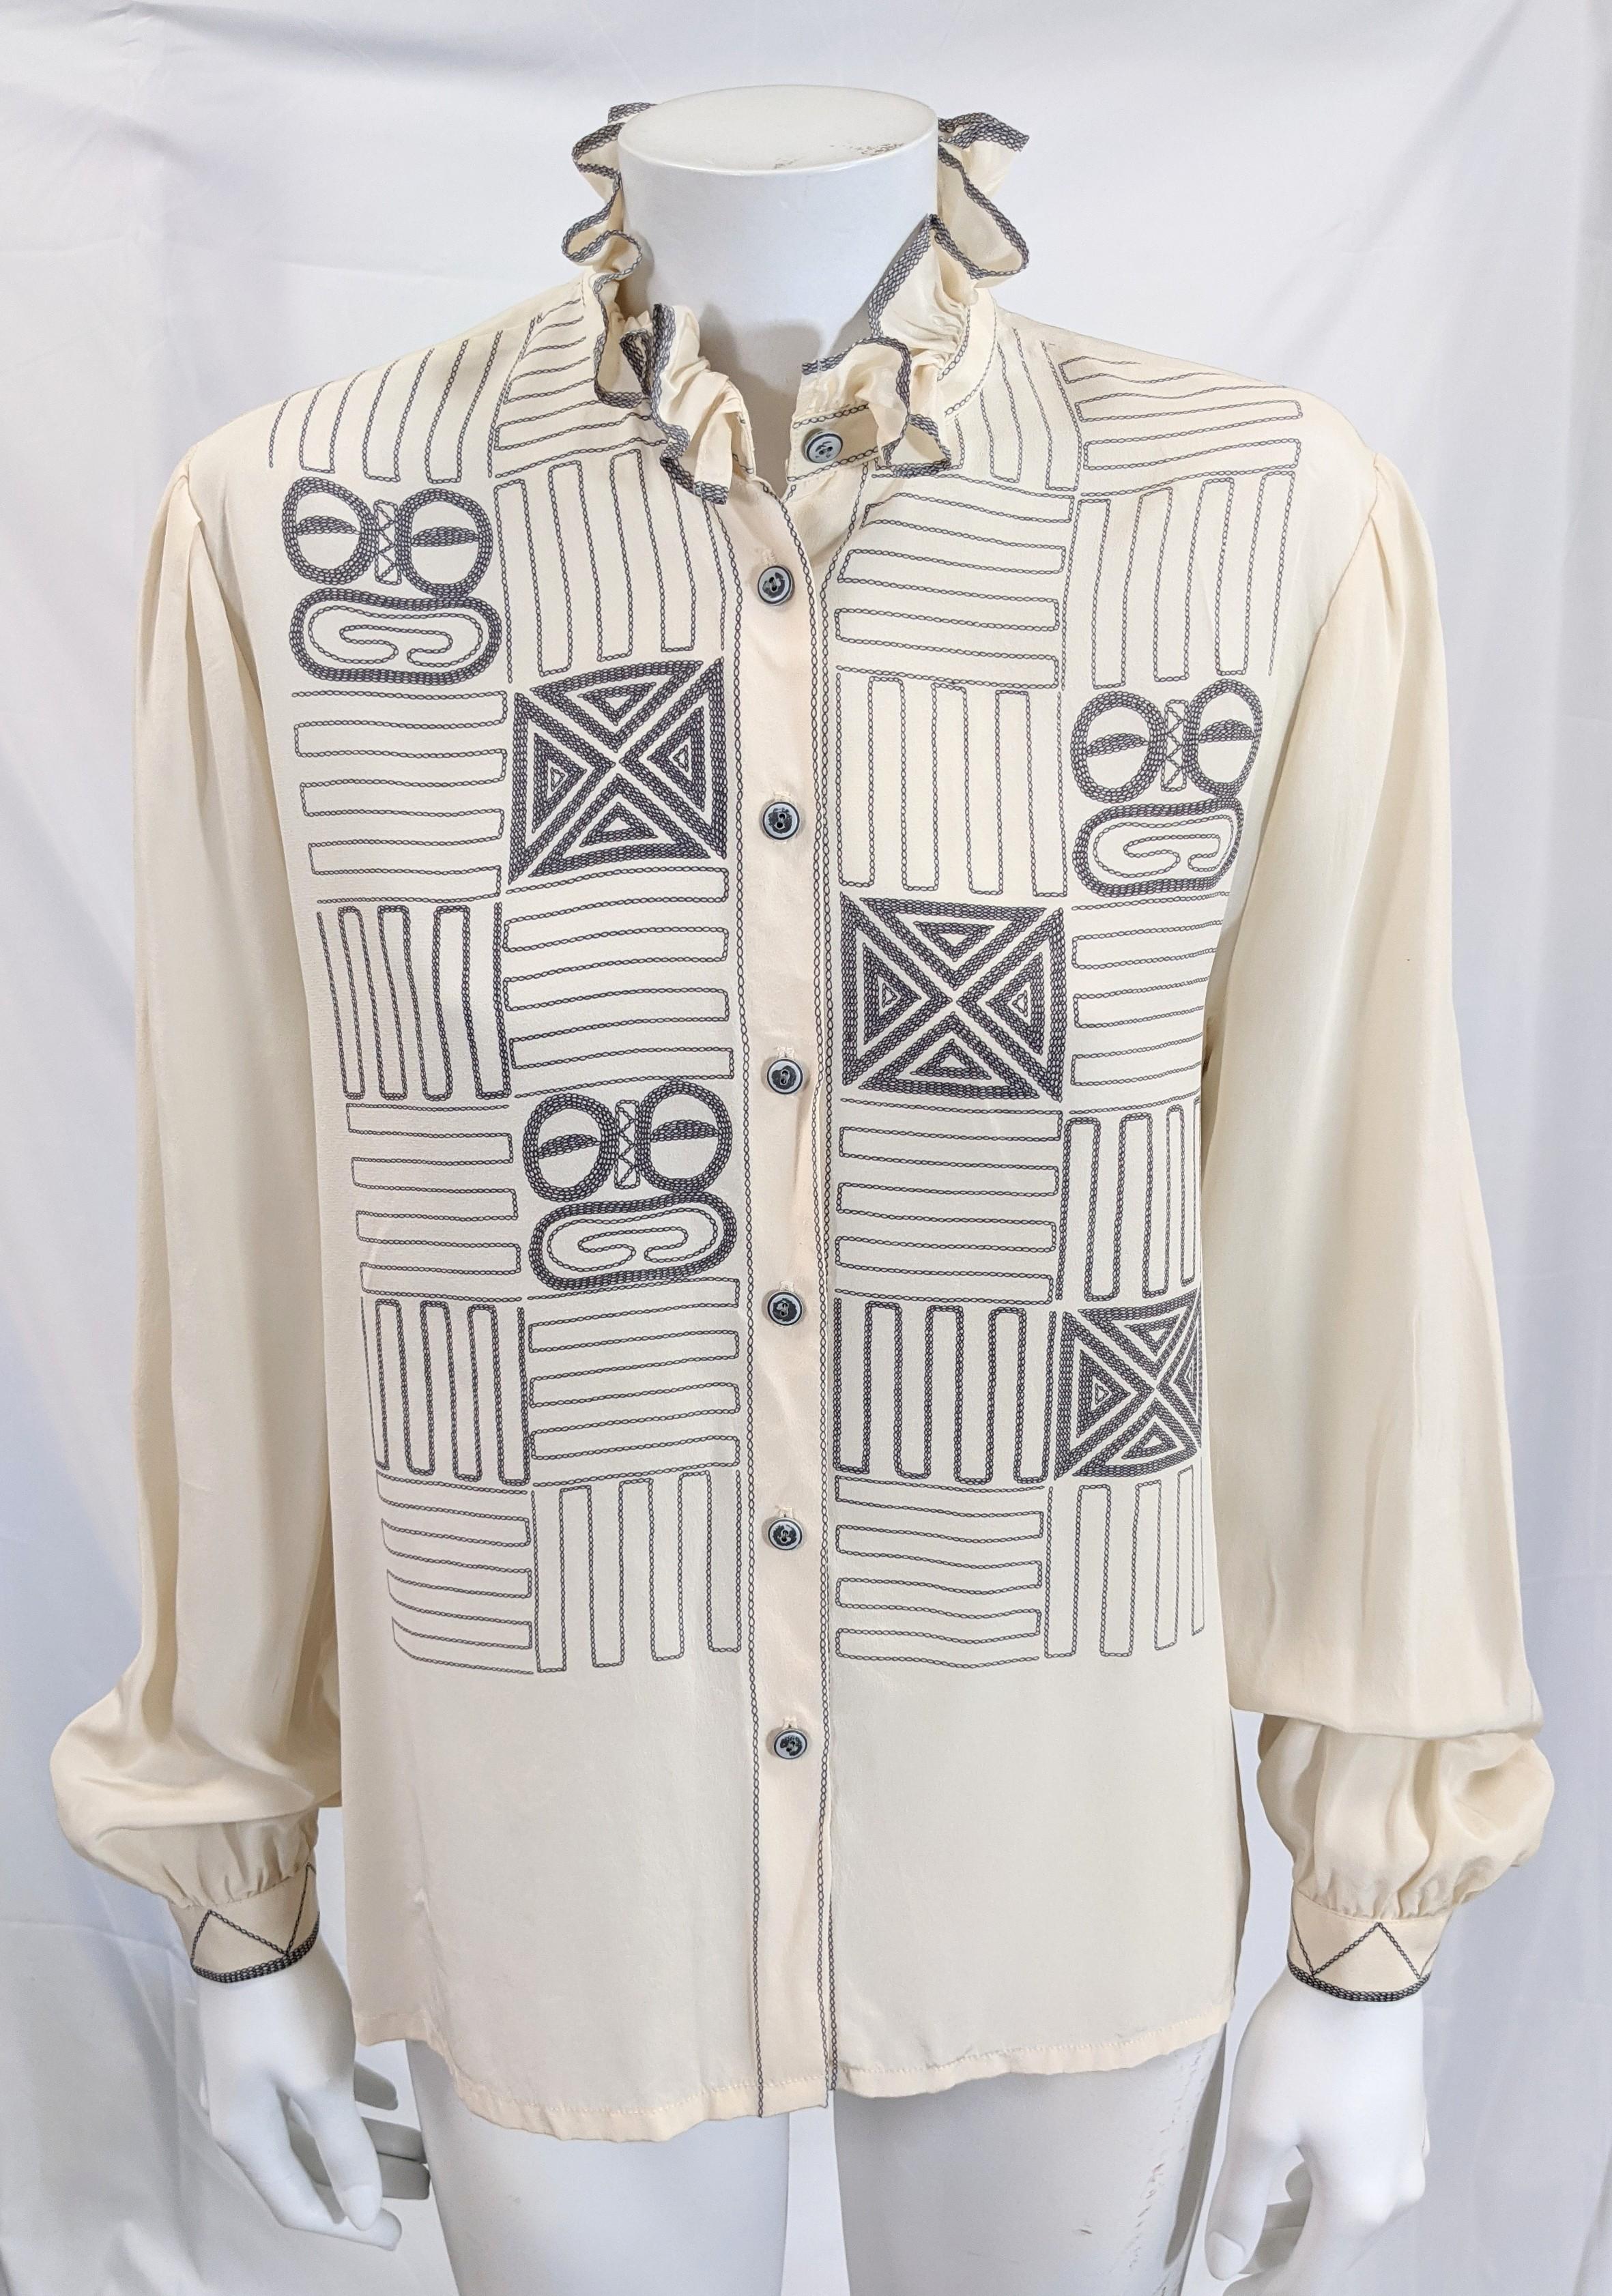 Unusual Louis Feraud silk crepe blouse with faux top stitching printed in black on cream, forming patterns which have slightly Eskimo overtones. Ruffle accents with topstitching on neck of blouse.   1980's France. 
23